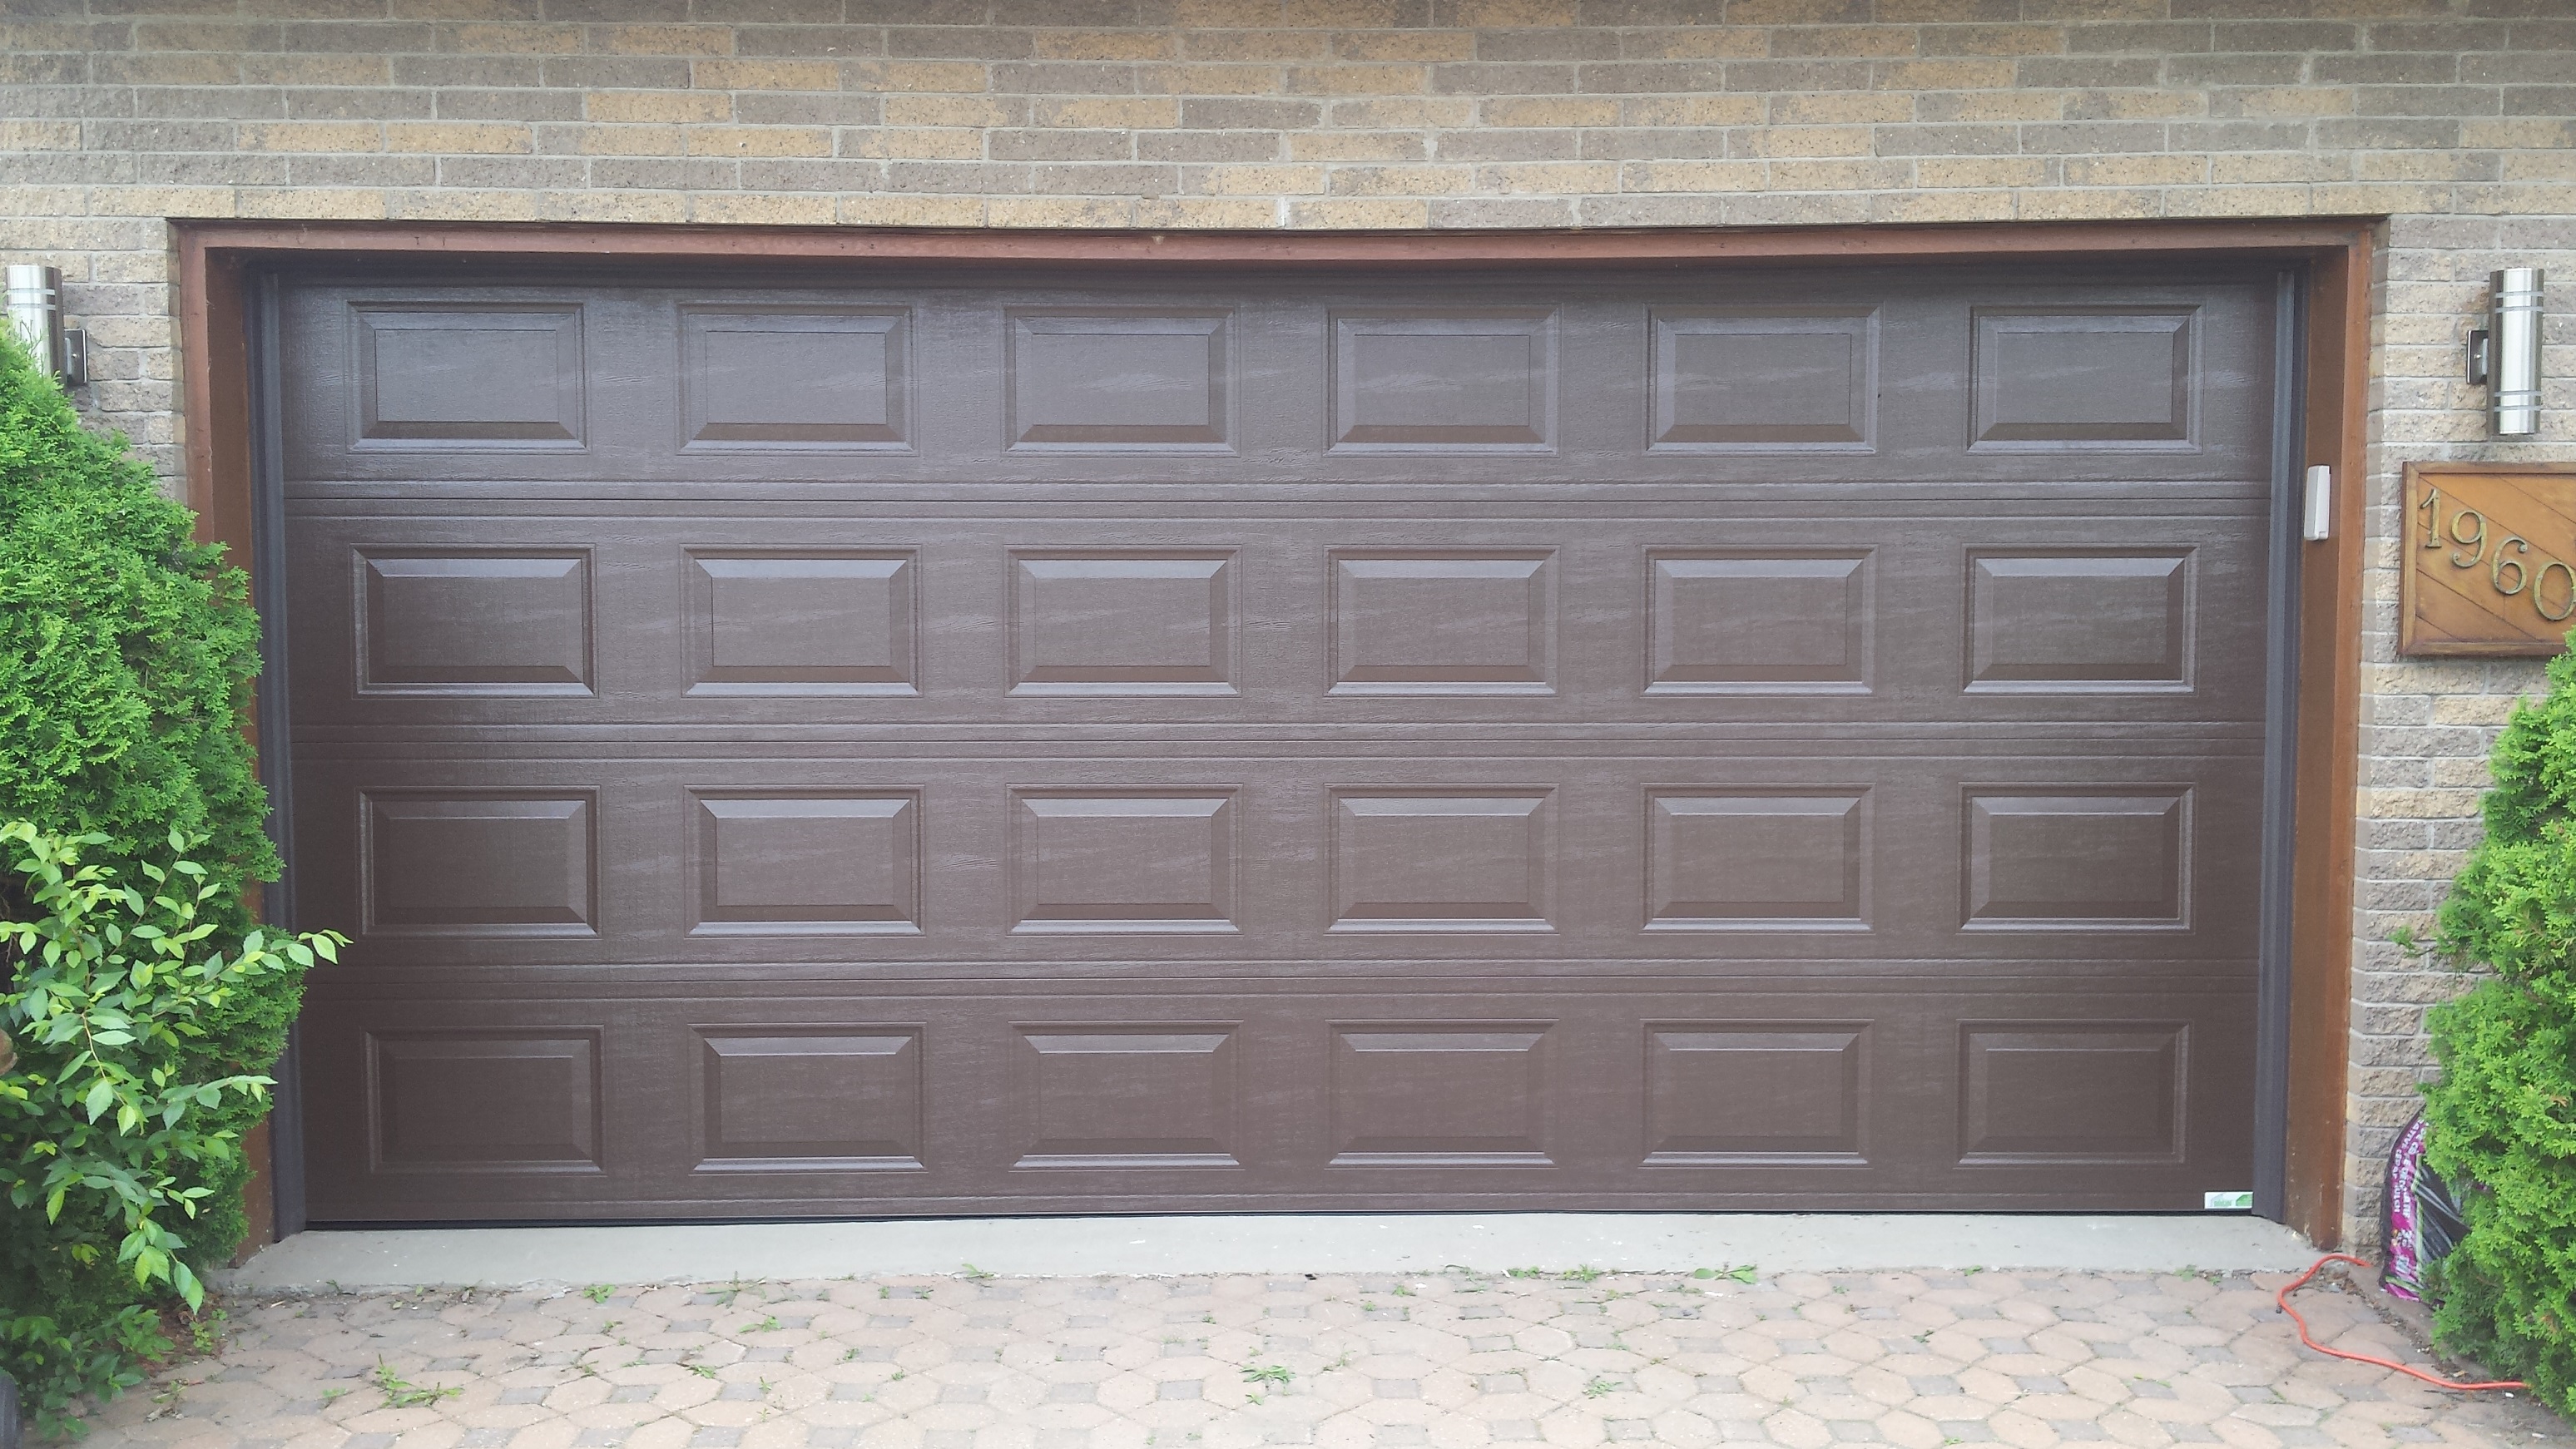 5 Signs that it’s Time to Replace Your Old Garage Door - Garage Solutions